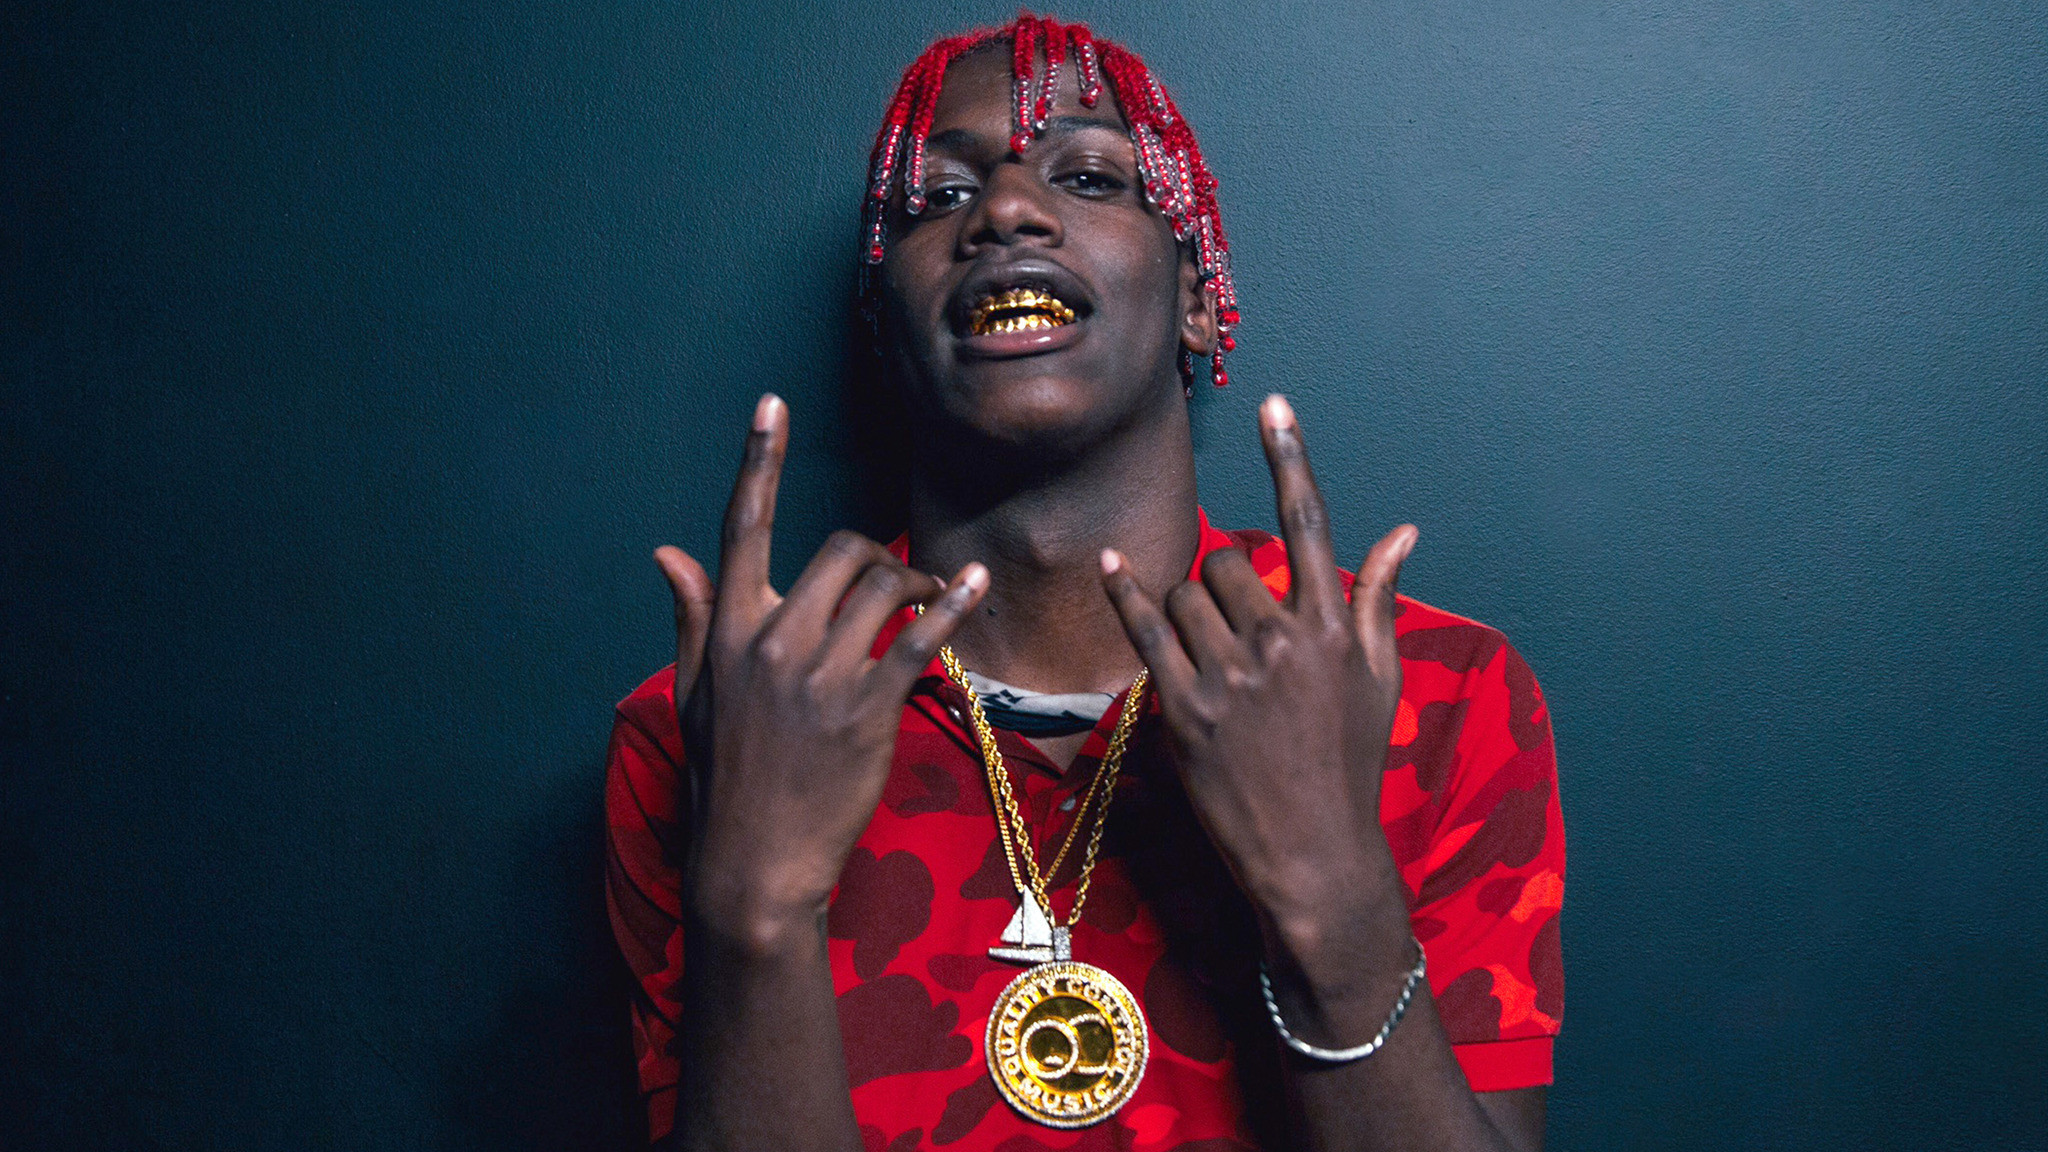 Lil Yachty Wallpaper Iphone.